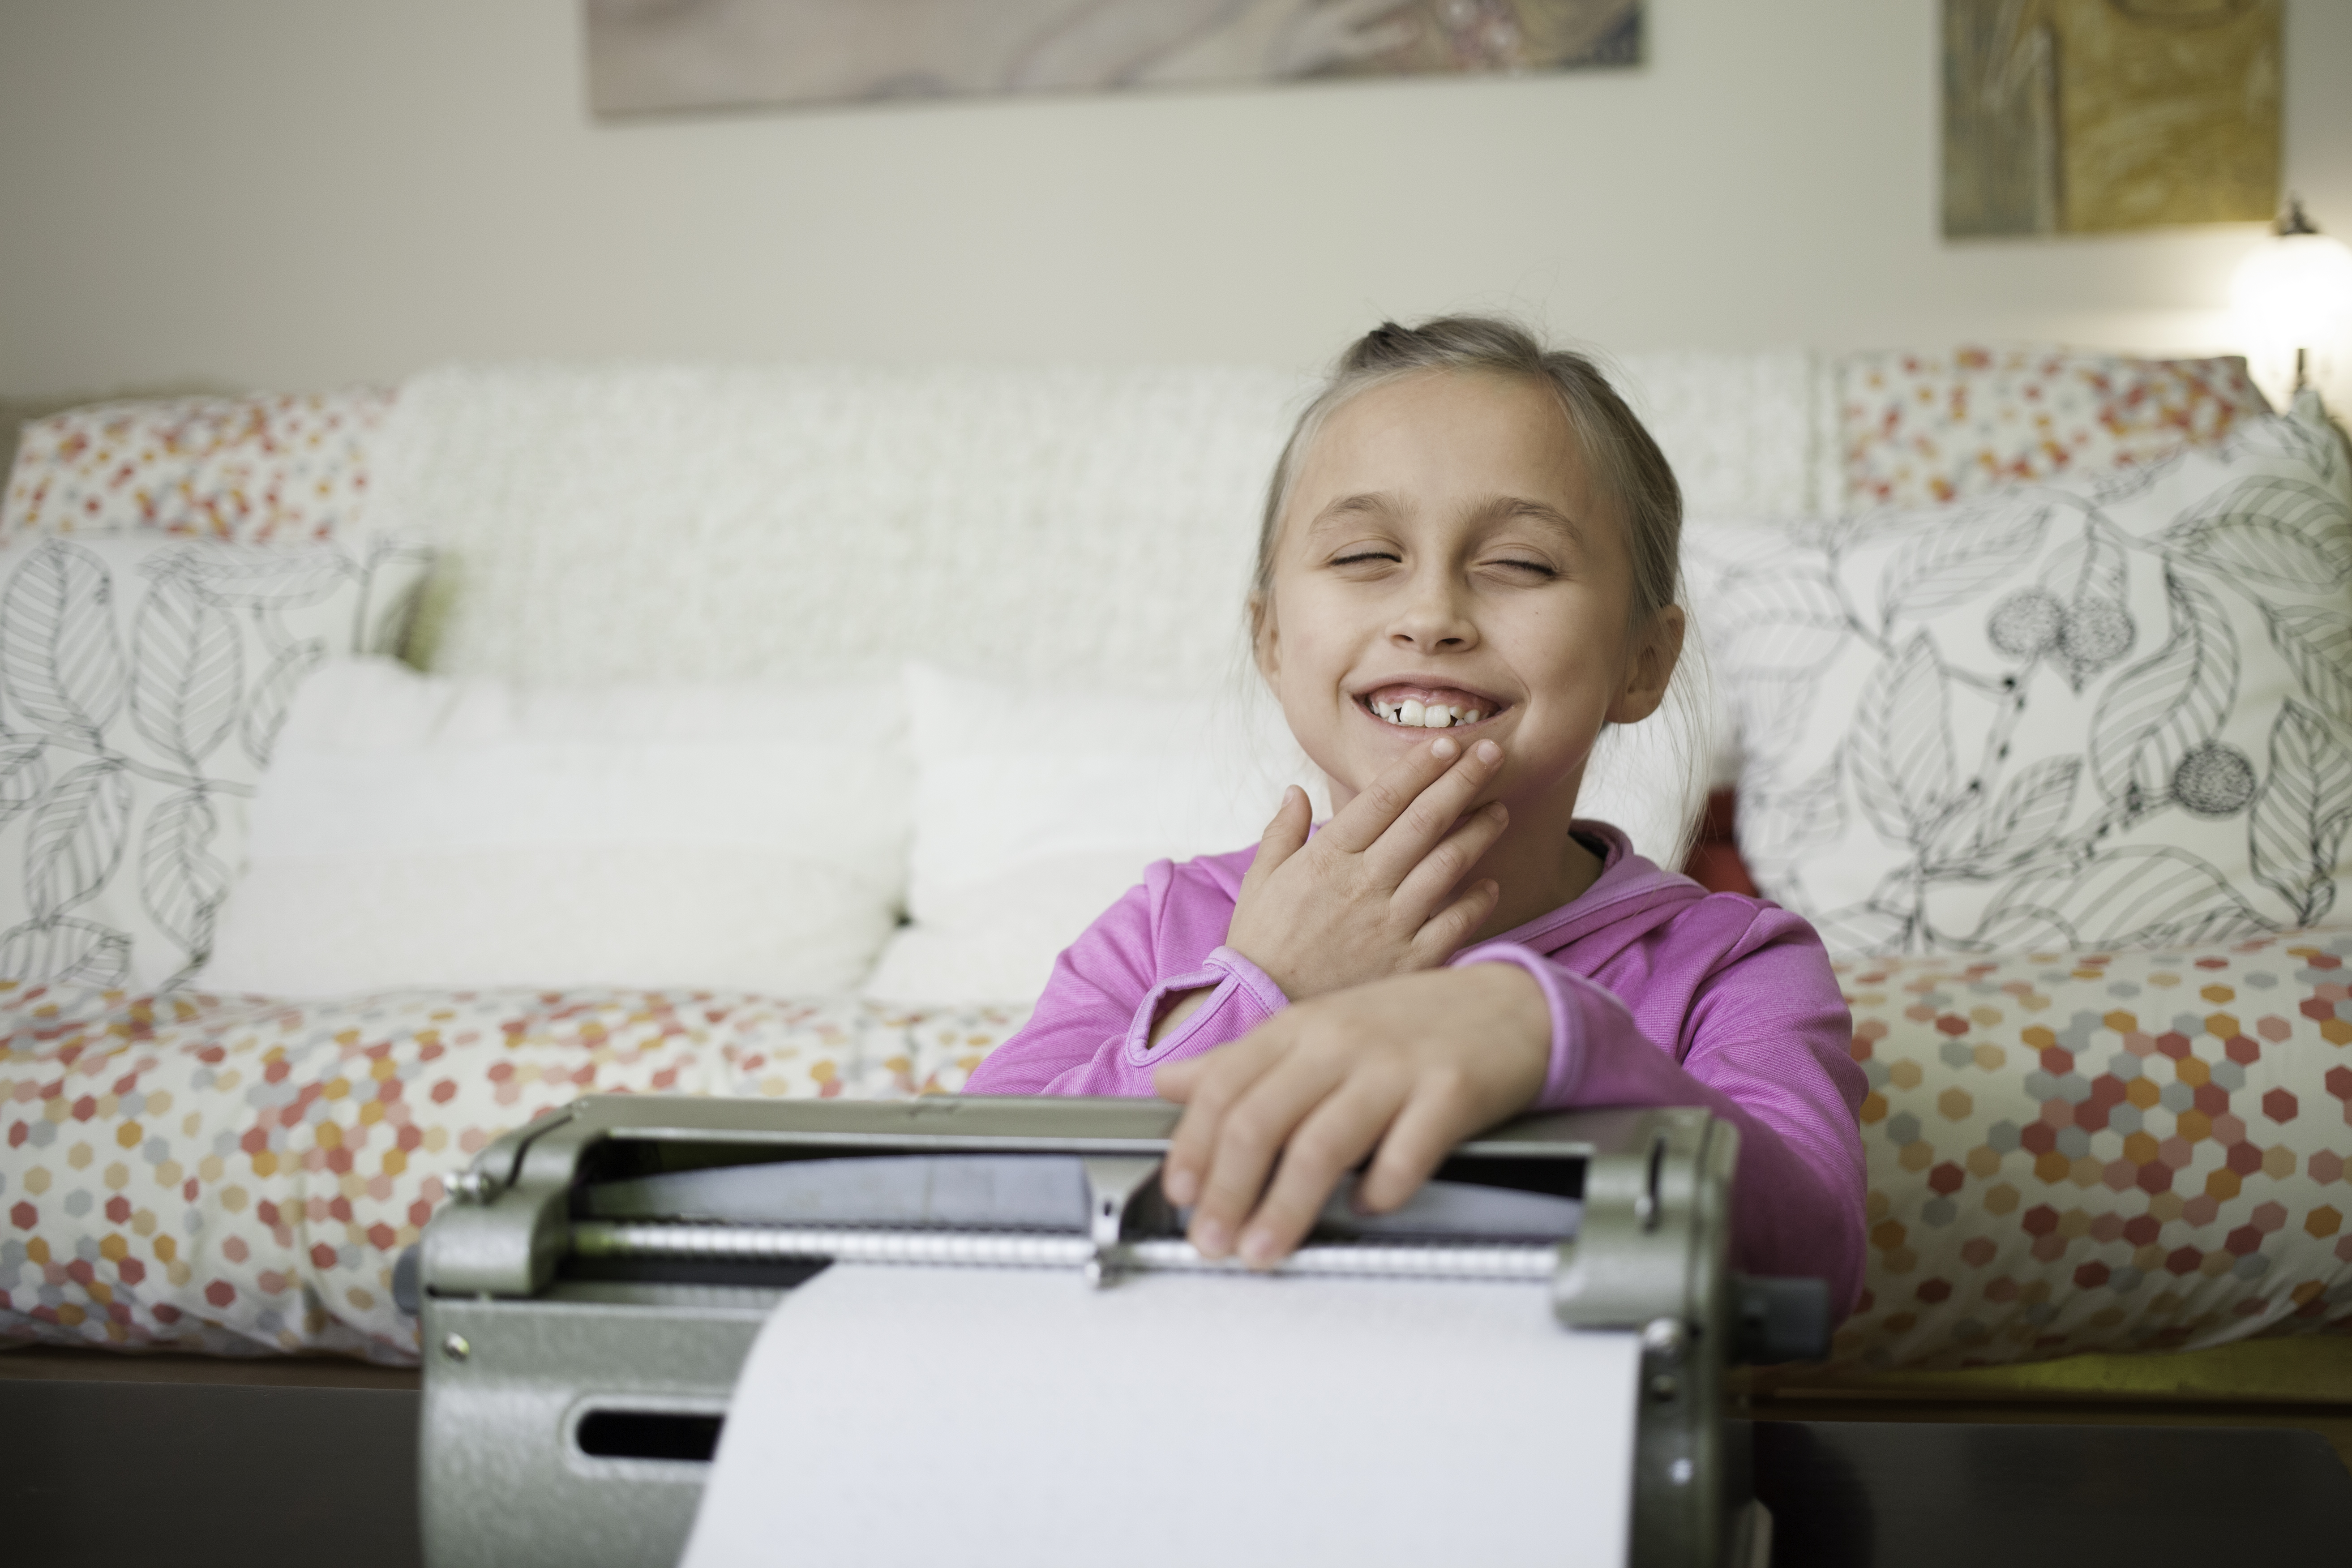 A child with sight loss using a Braille typewriter